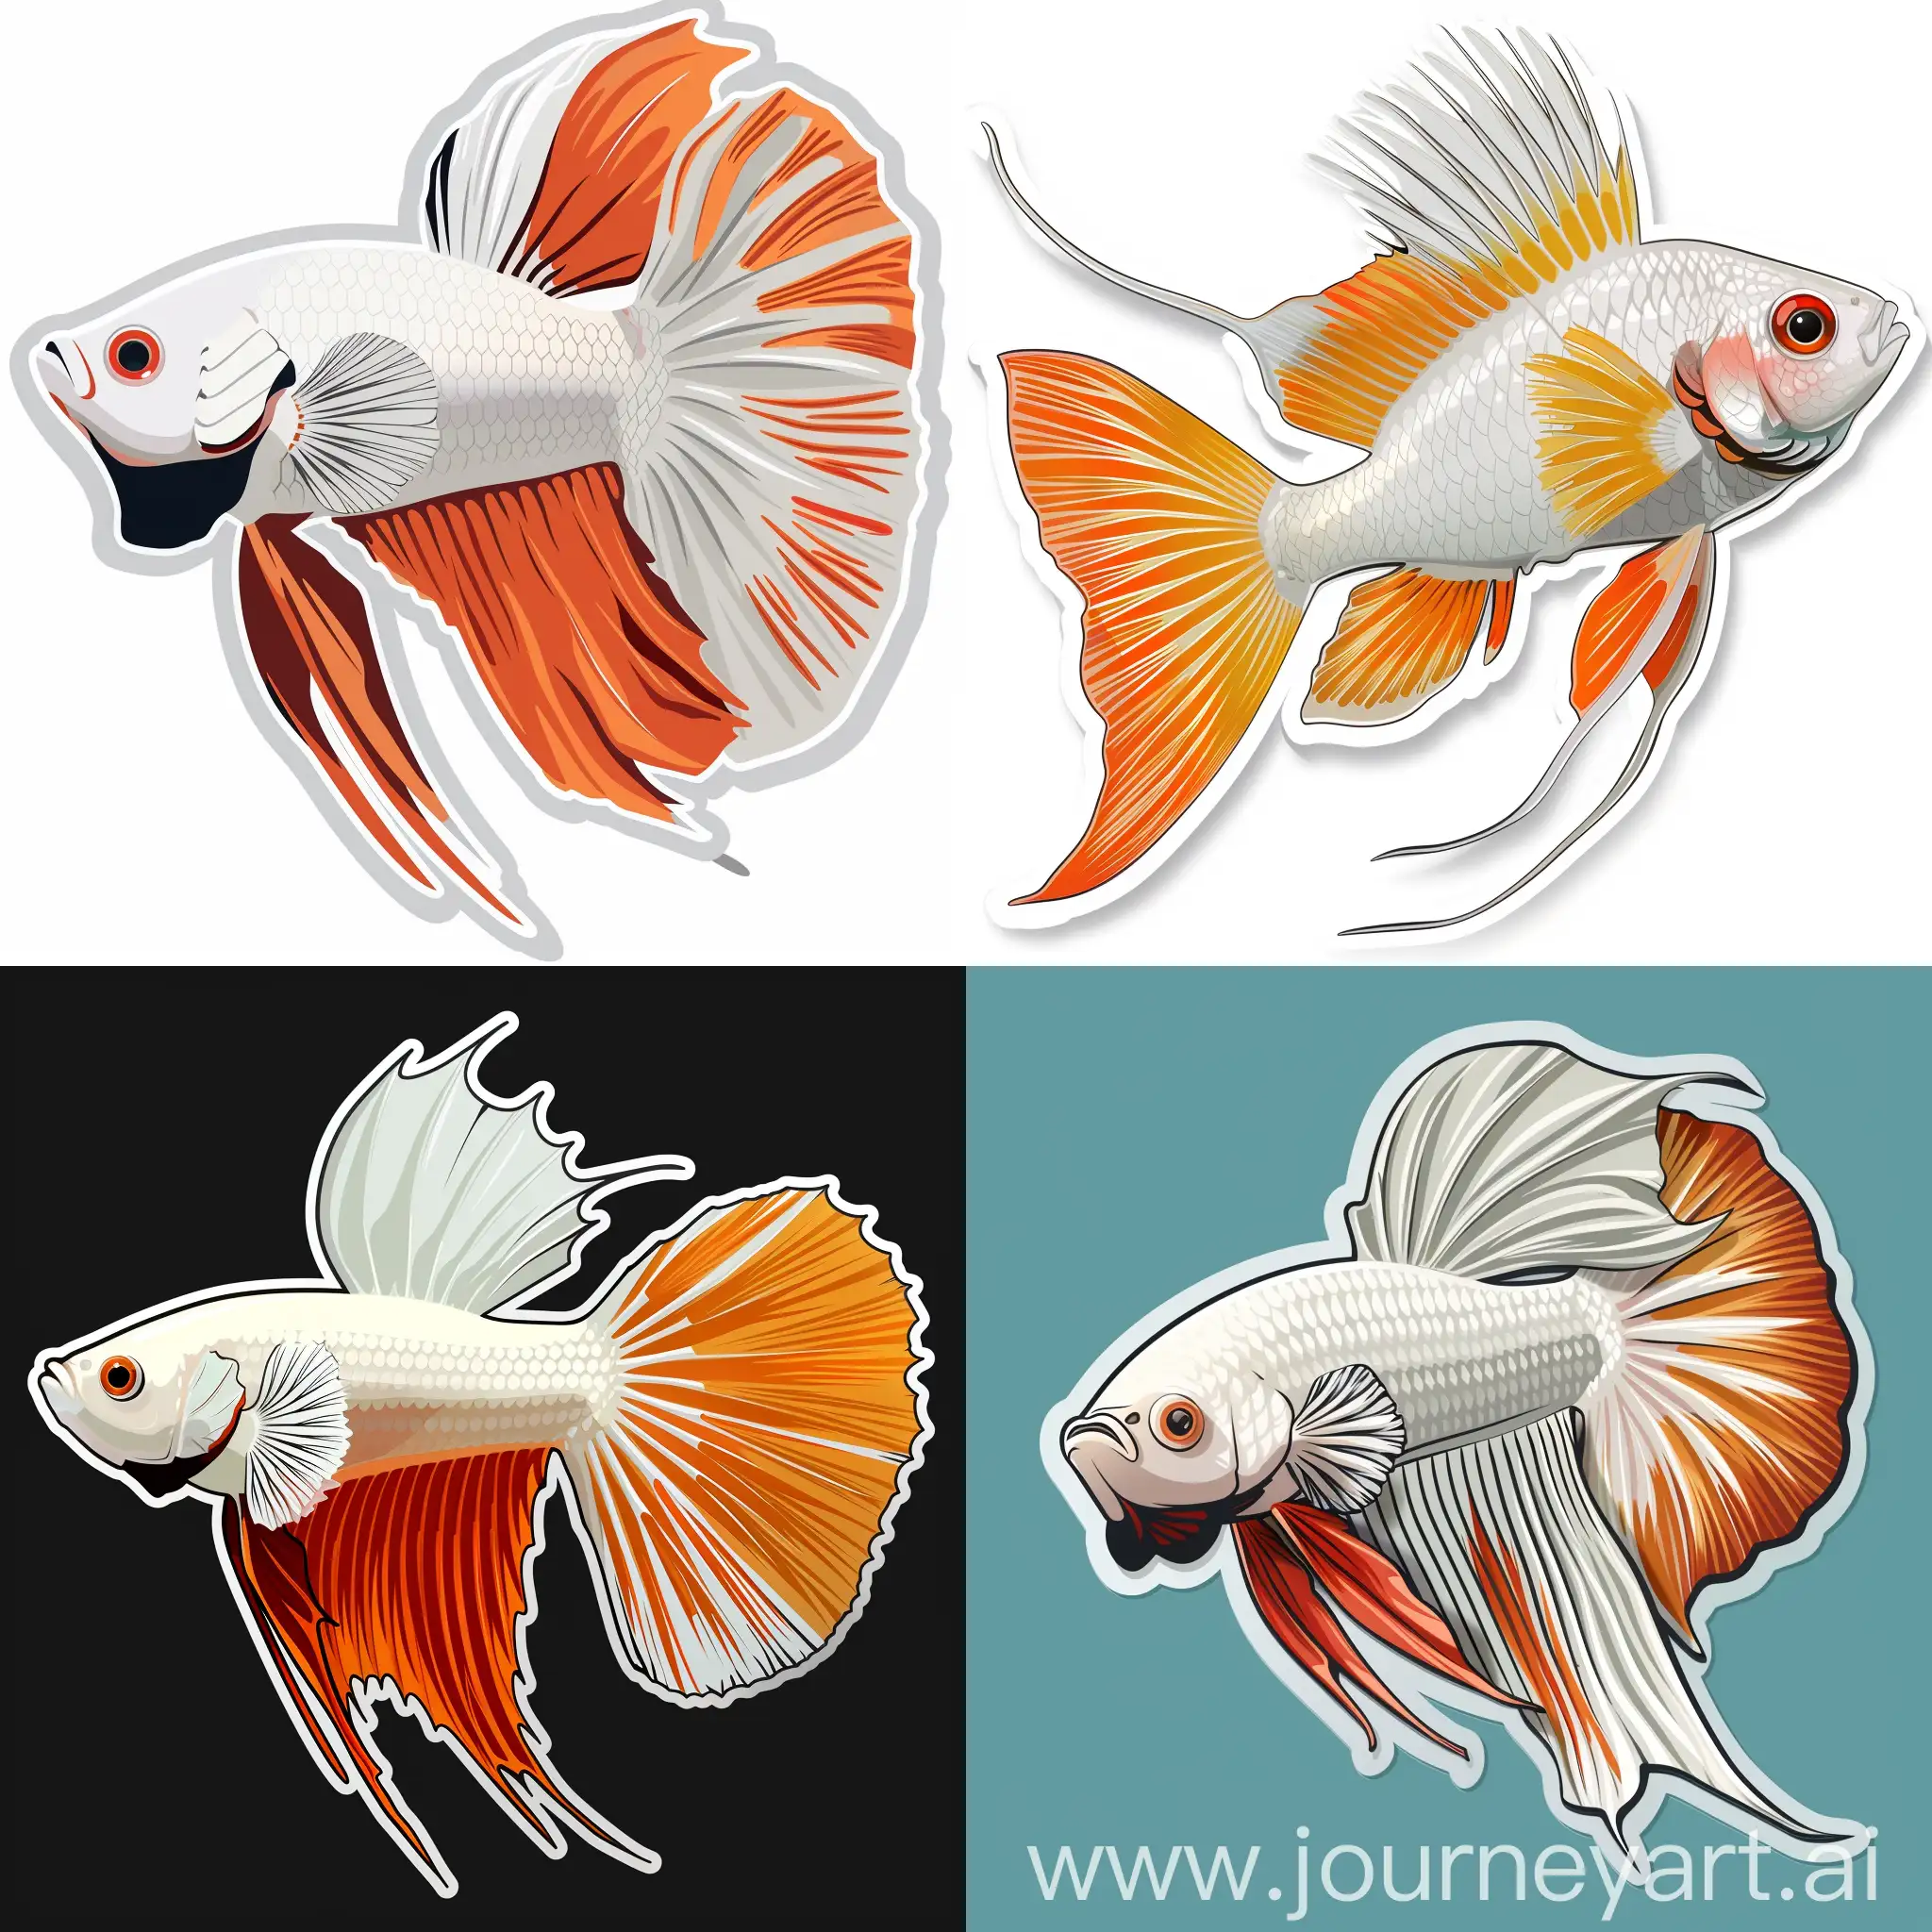 cartoon sticker flat illustration of close up Stereoscopic white and orange long tailed fightingfish,  high quality details